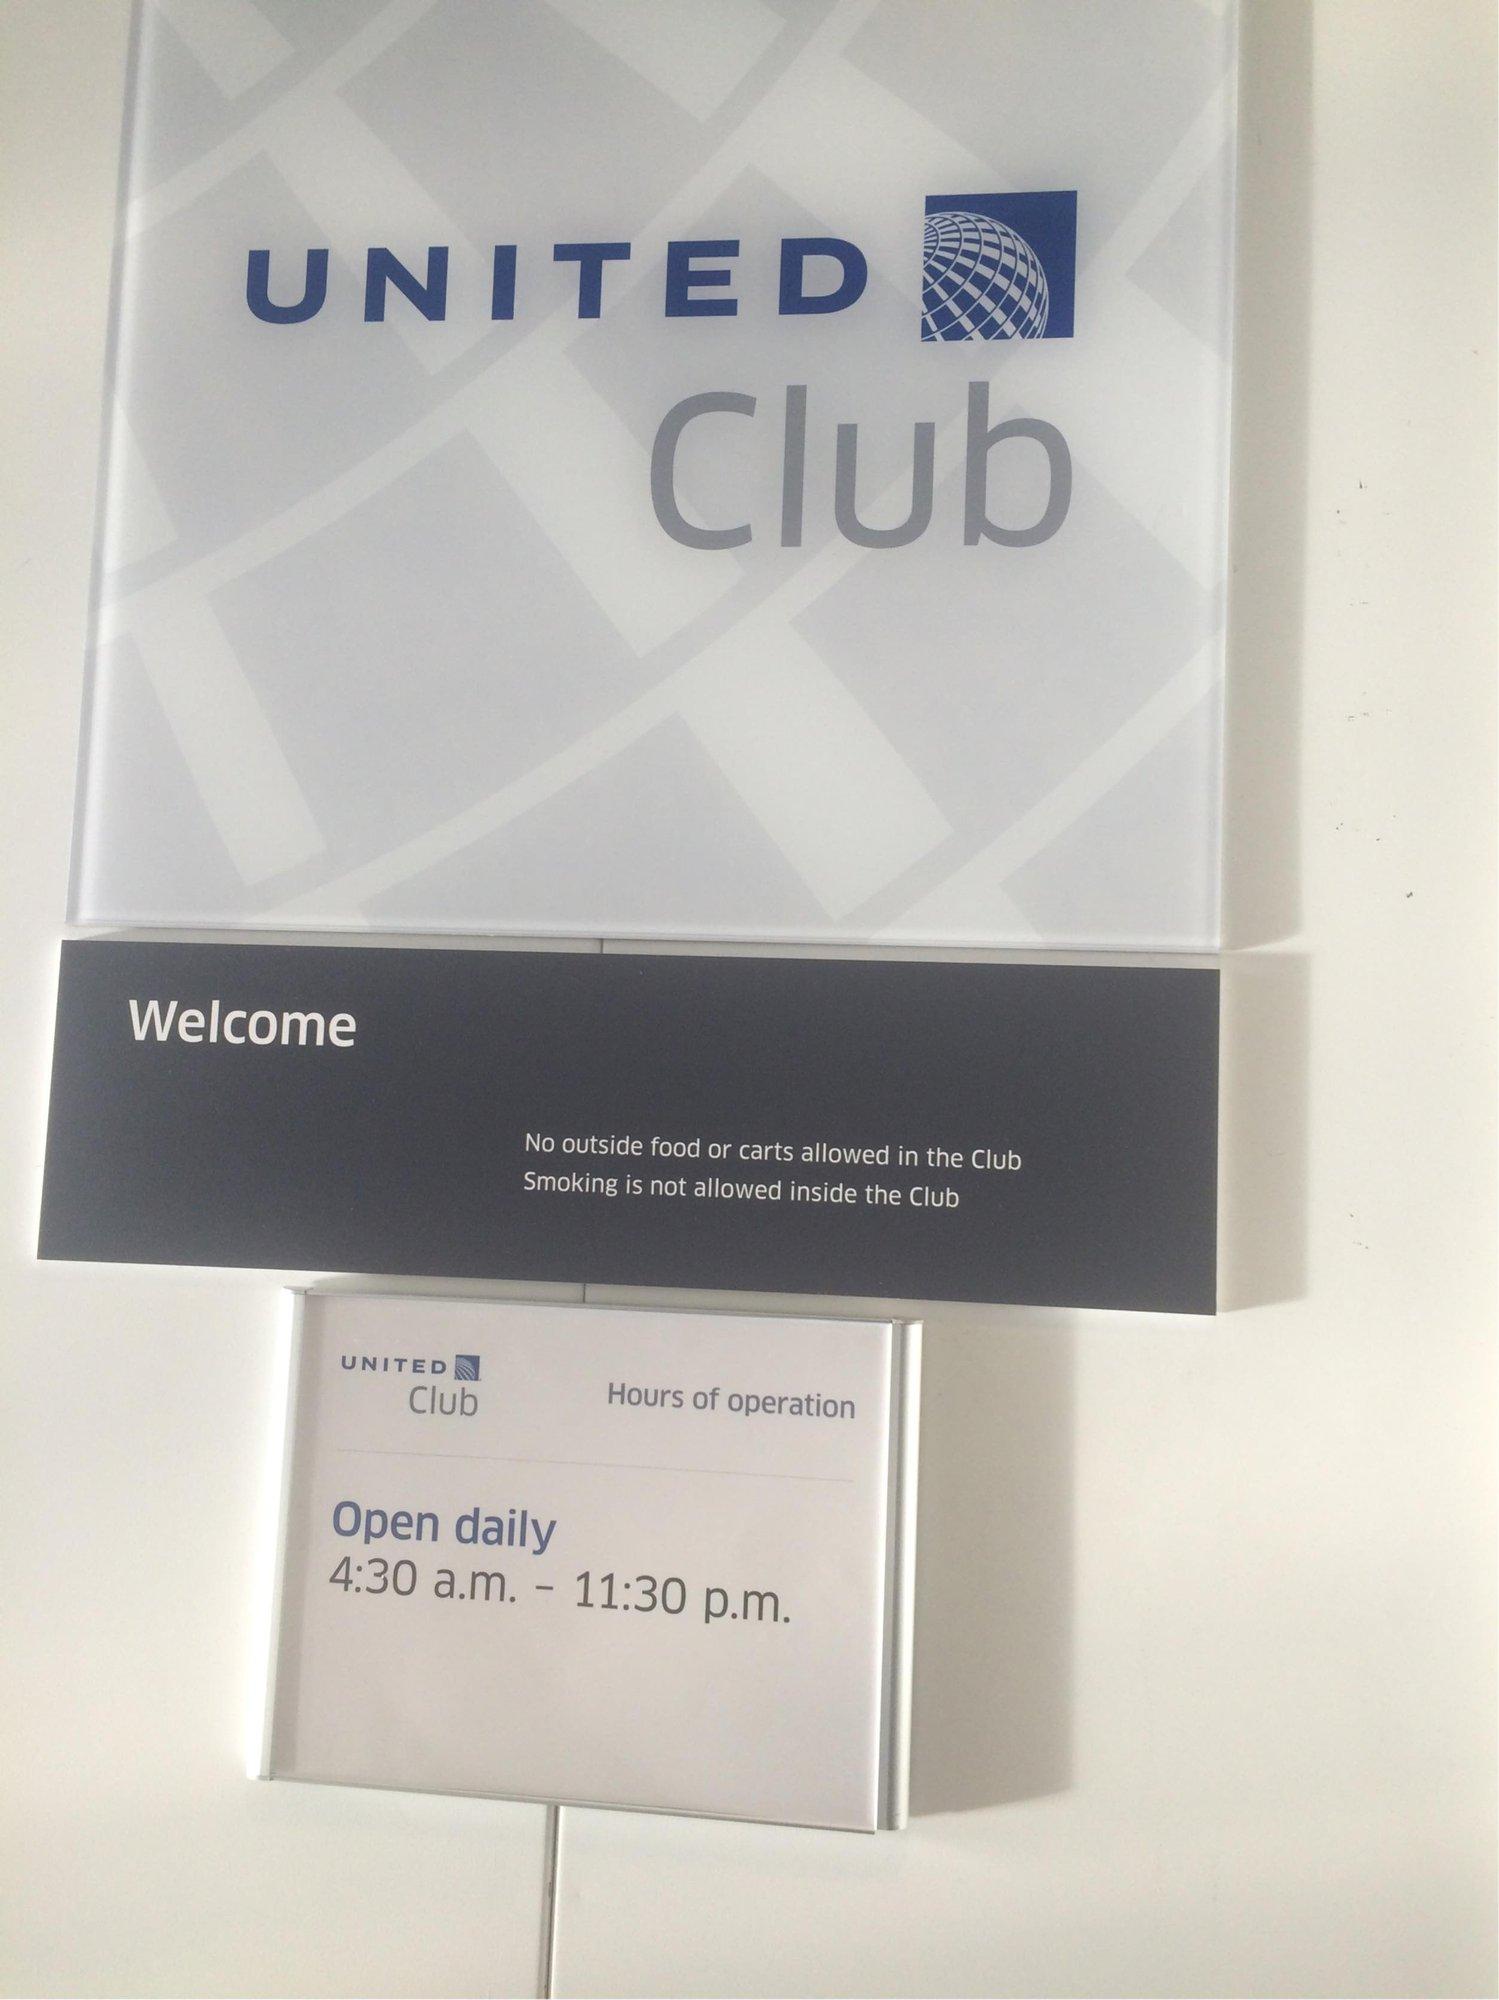 United Airlines United Club image 35 of 57